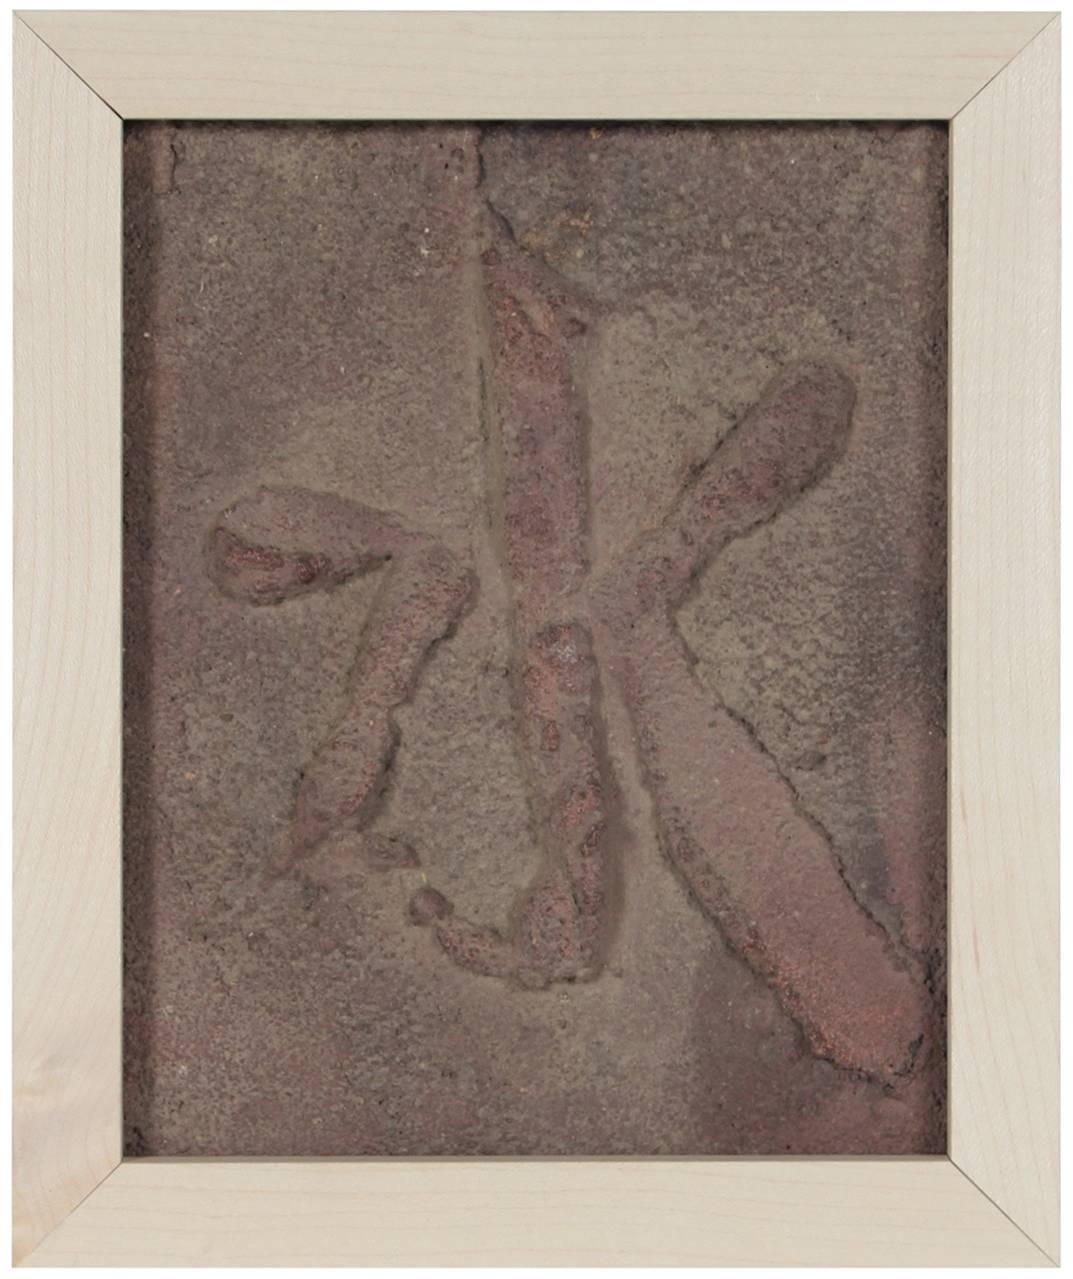 Hugh Wiley Abstract Sculpture �– "Water" Cement Relief Sculpture, Late 20th Century